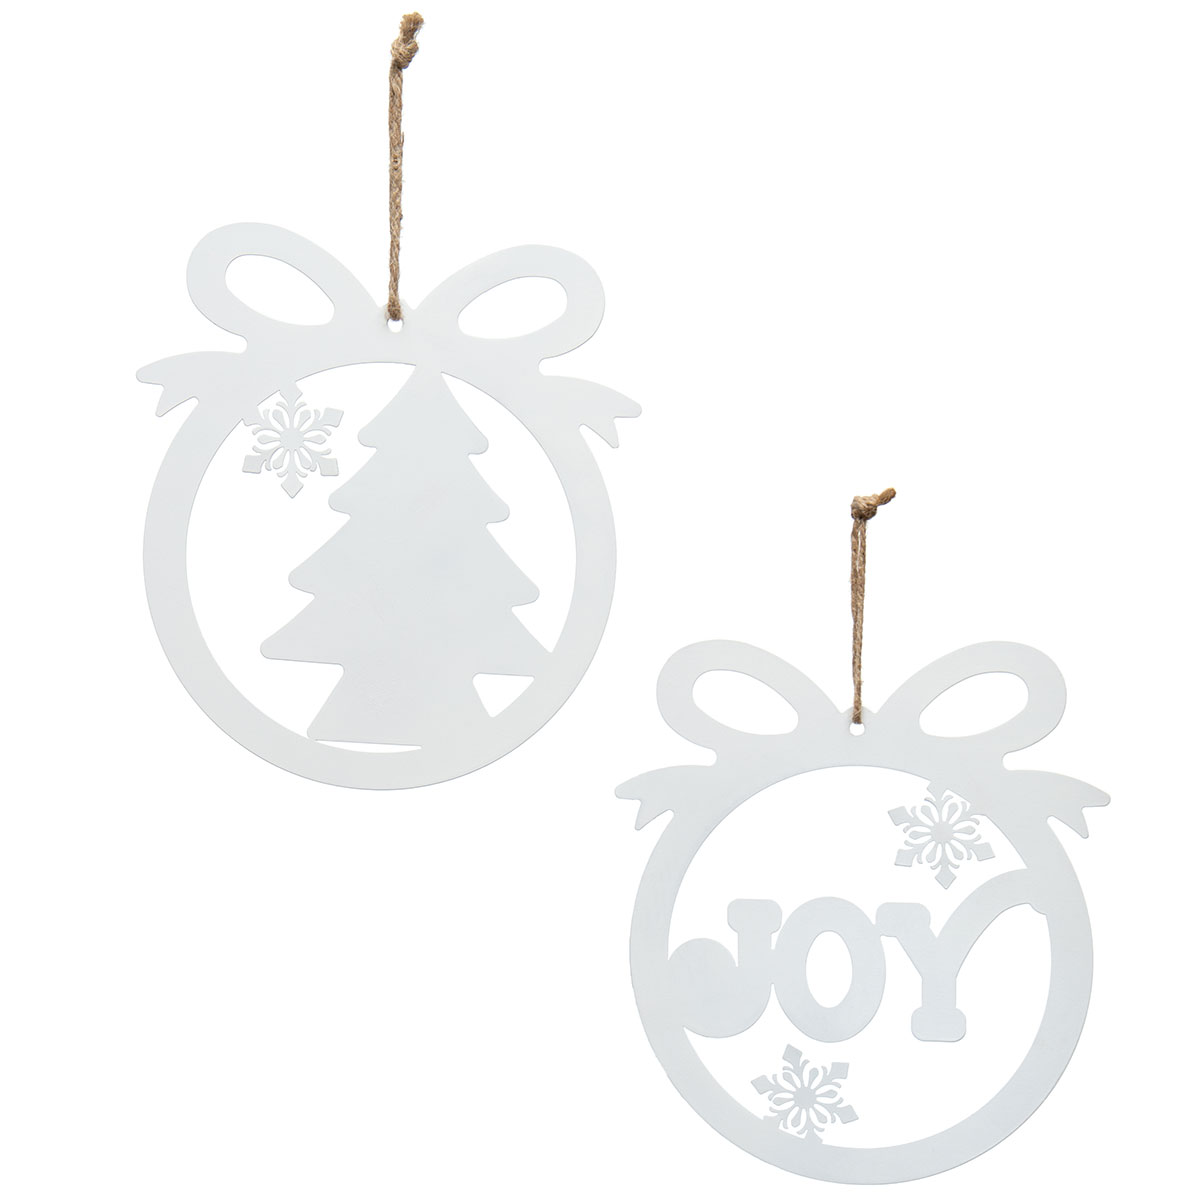 !WINTER BALL WITH BOW METAL FLAT ORNAMENT WHITE WITH